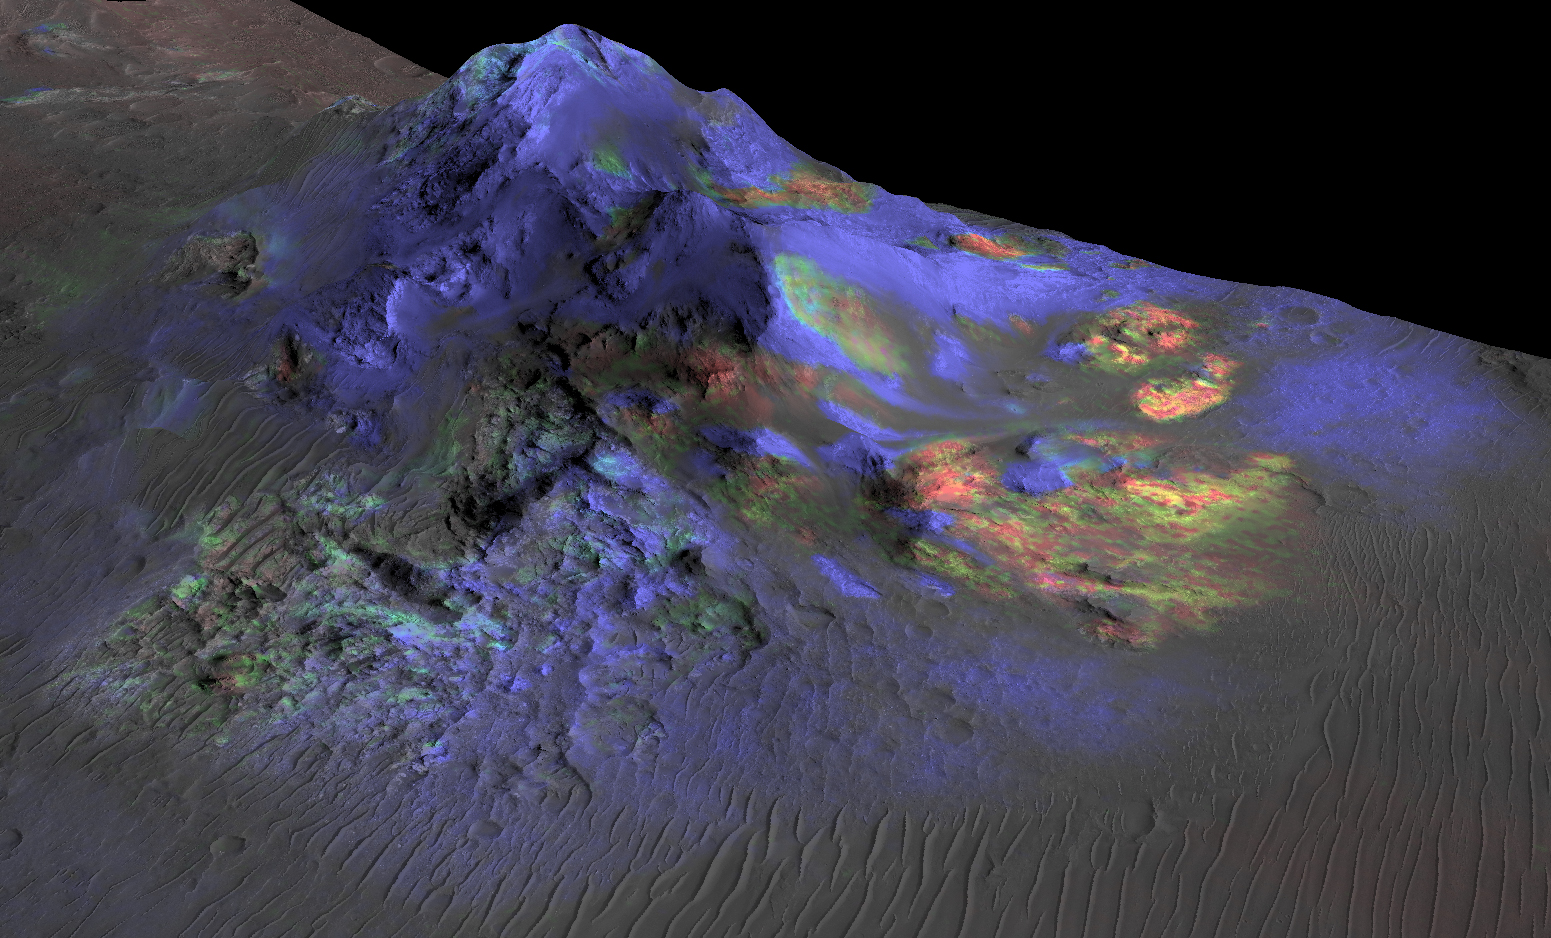 Researchers have found deposits of impact glass (in green) preserved in Martian craters